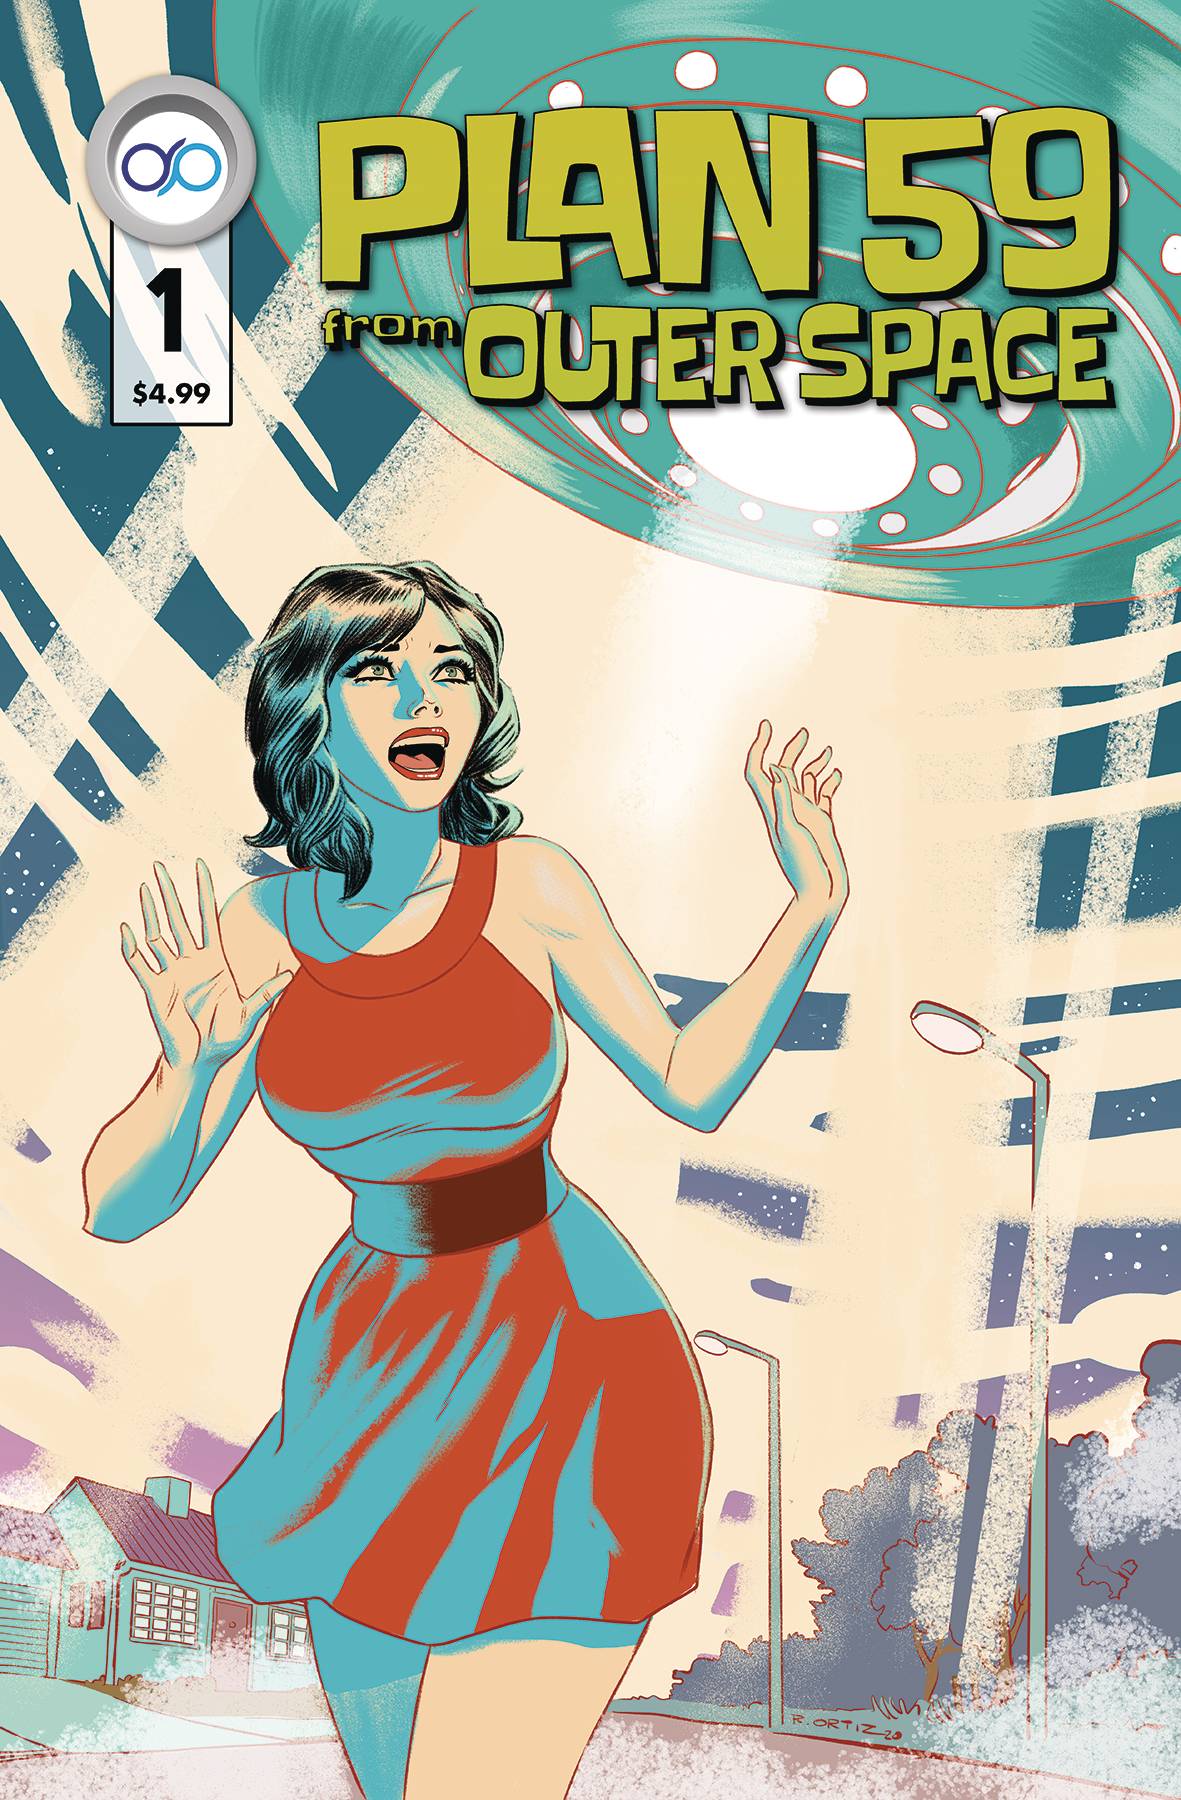 PLAN 59 FROM OUTER SPACE #1 (OF 3) (MR) - Third Eye